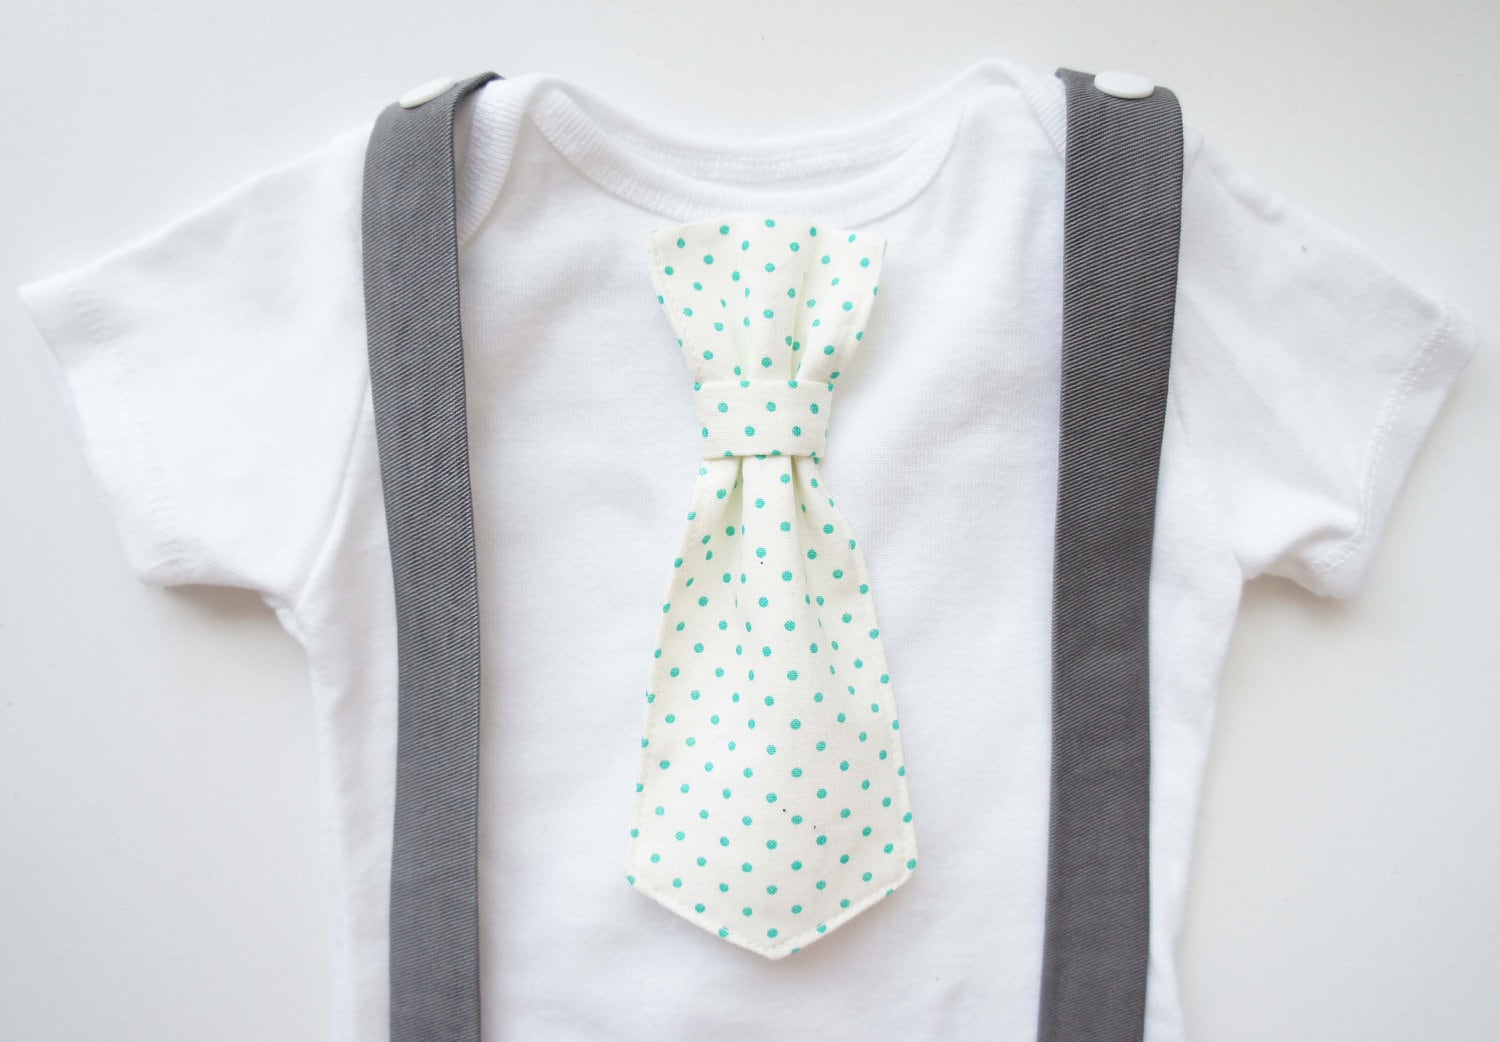 Changeable Baby Boy Tie and Bow Tie Onesie with by LouEmbres